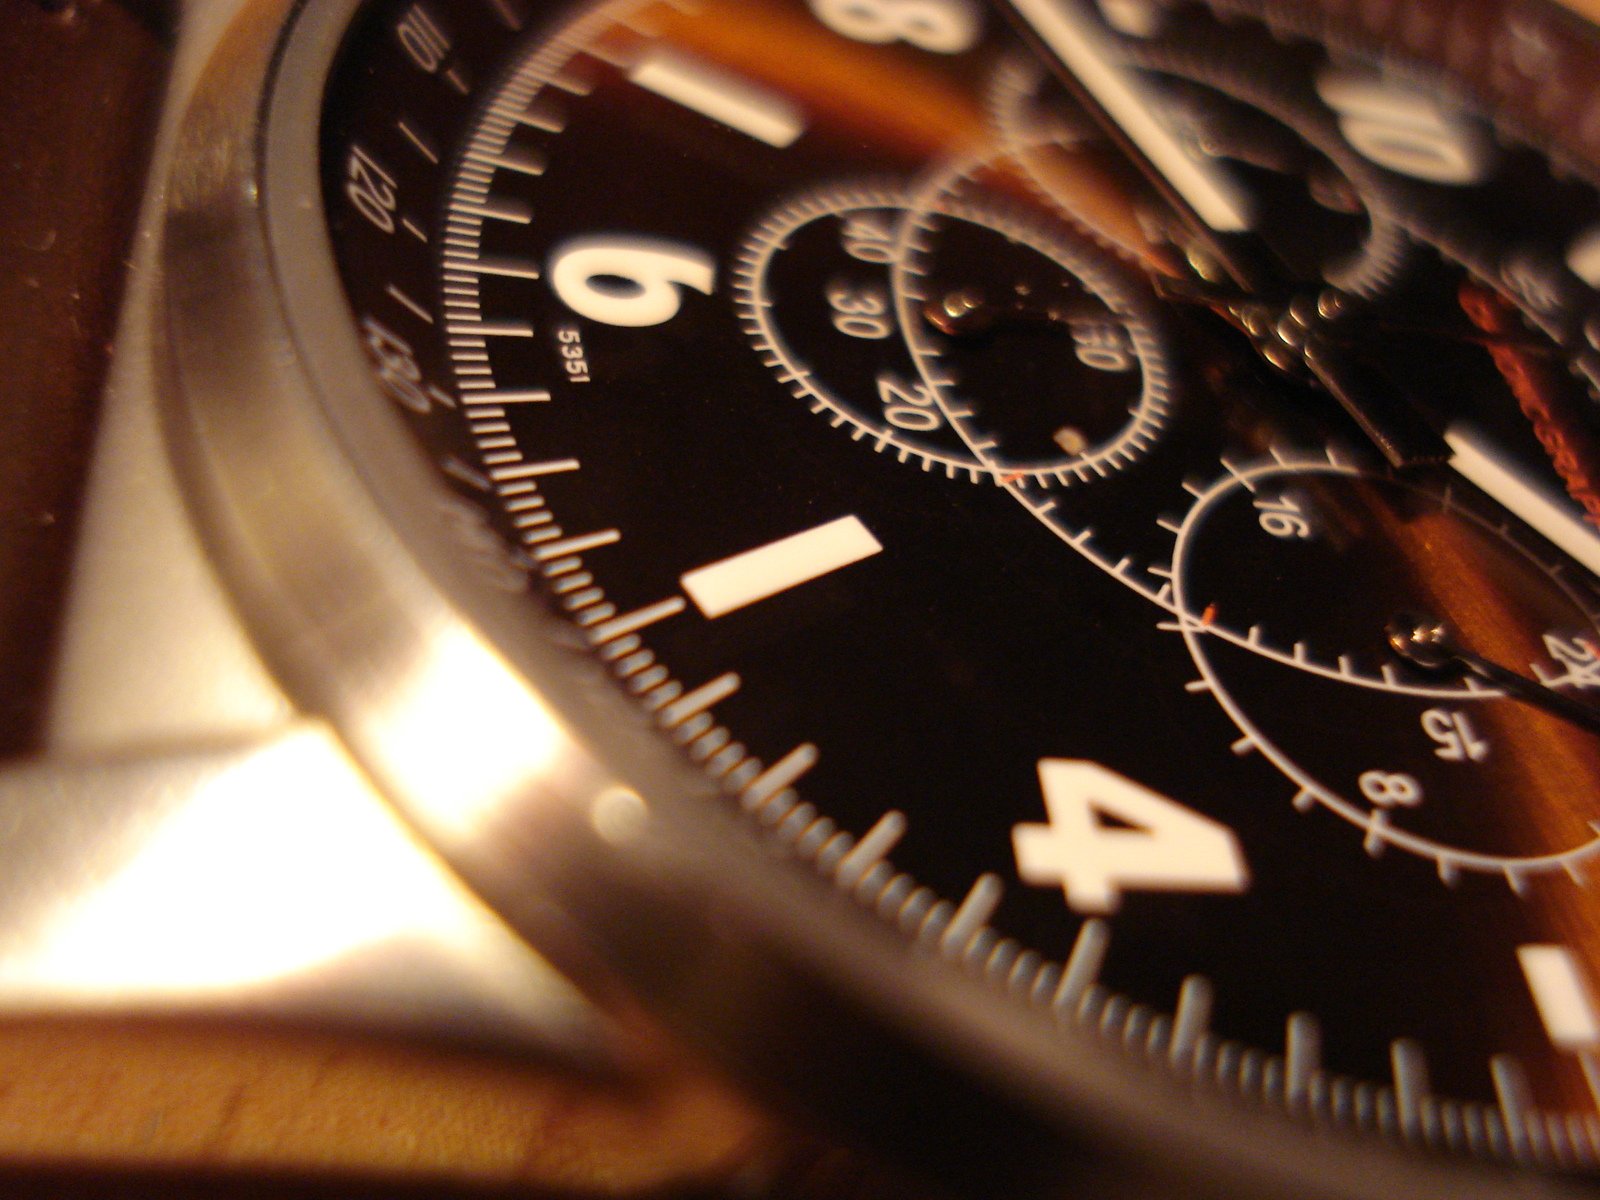 close up of the face of a multi - time watch